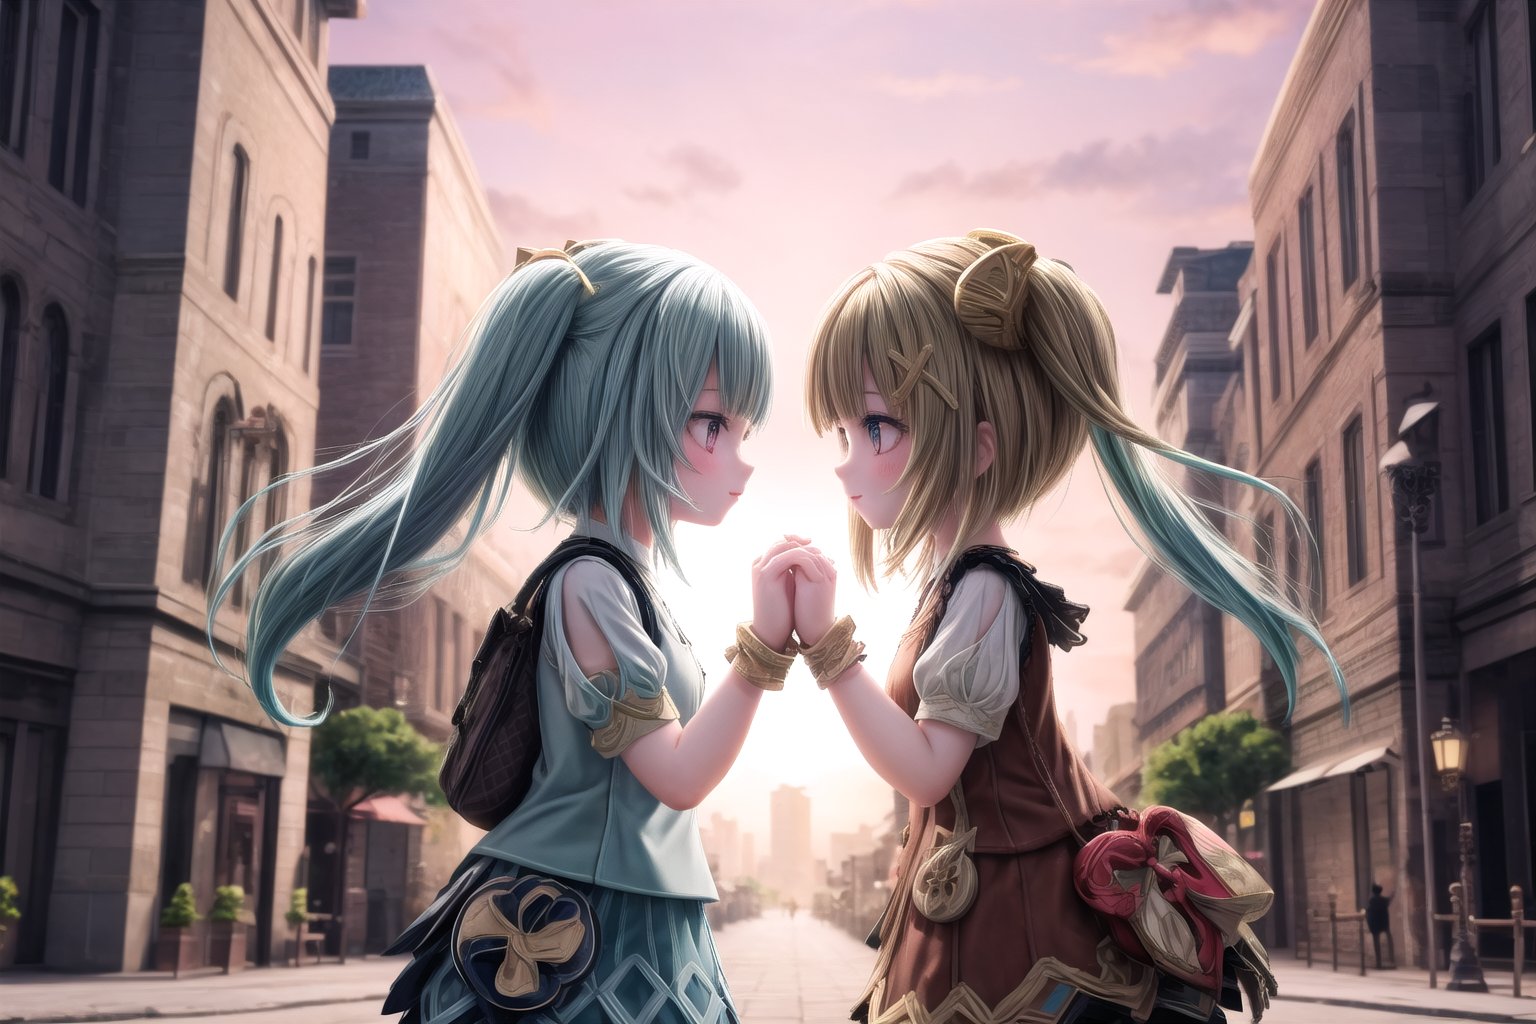 FaruzanRnD and Yaoyaodef, two sisters bound by shared experiences, stand together in a powerful pose, hands clasped, amidst Lyiue's vibrant cityscape at sunset. The warm orange glow casts intricate shadows on ancient architecture, while the sisters' faces radiate warmth and affection under soft golden light. In the background, bustling streets come alive with daily activity, as the pink and purple-hued sky signals dusk in this breathtaking metropolis.